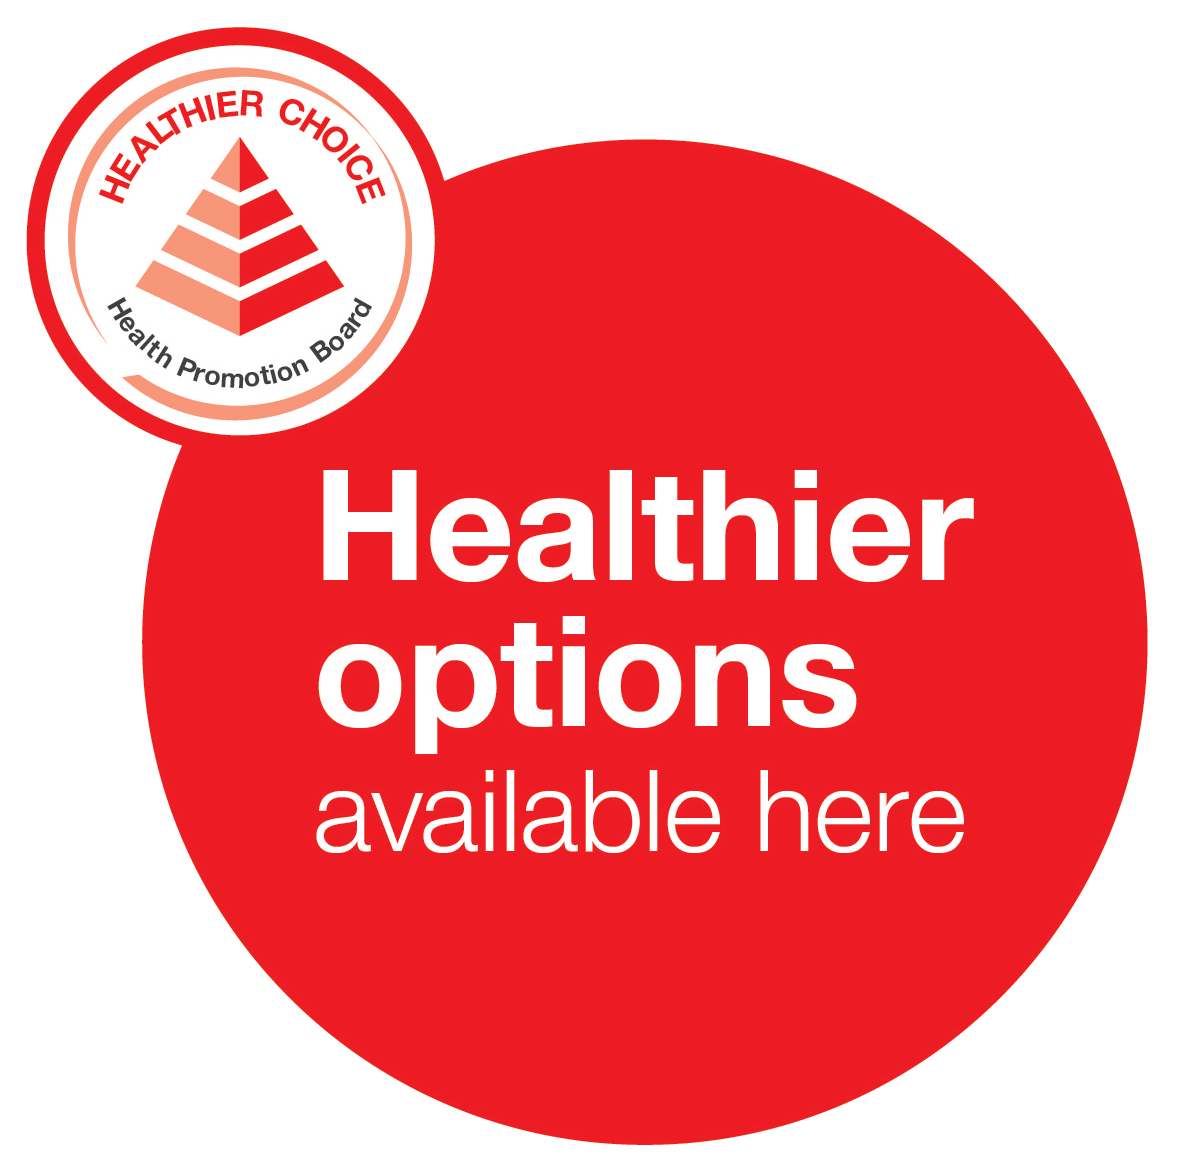 Healthier Options available